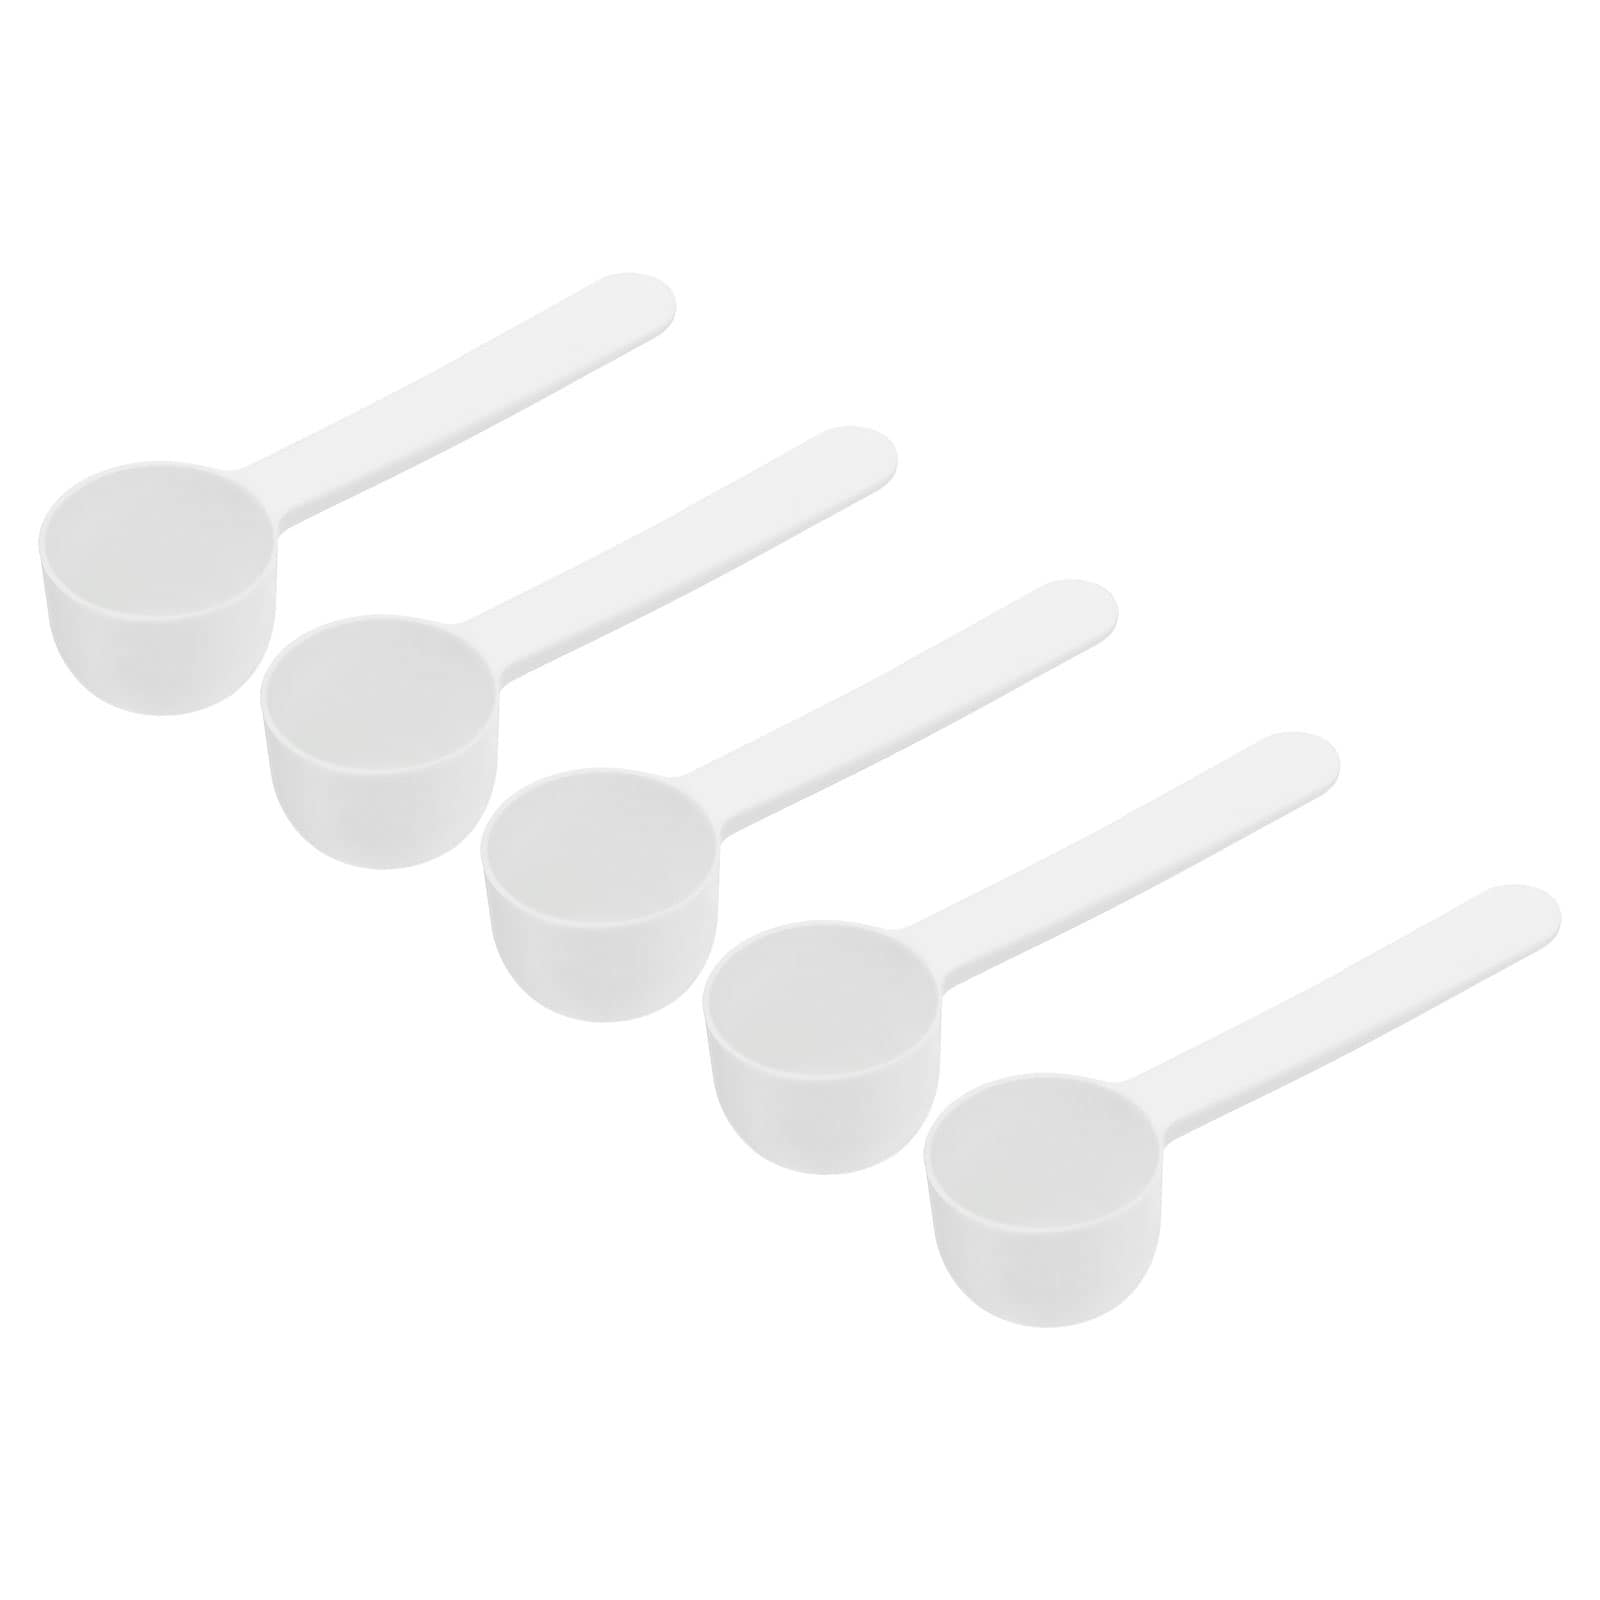 https://ak1.ostkcdn.com/images/products/is/images/direct/270ee200f089366264910d46210ab2cb9a9a15e0/Micro-Spoons-5-Gram-Measuring-Scoop-Plastic-Flat-Bottom-Mini-Spoon-15Pcs.jpg